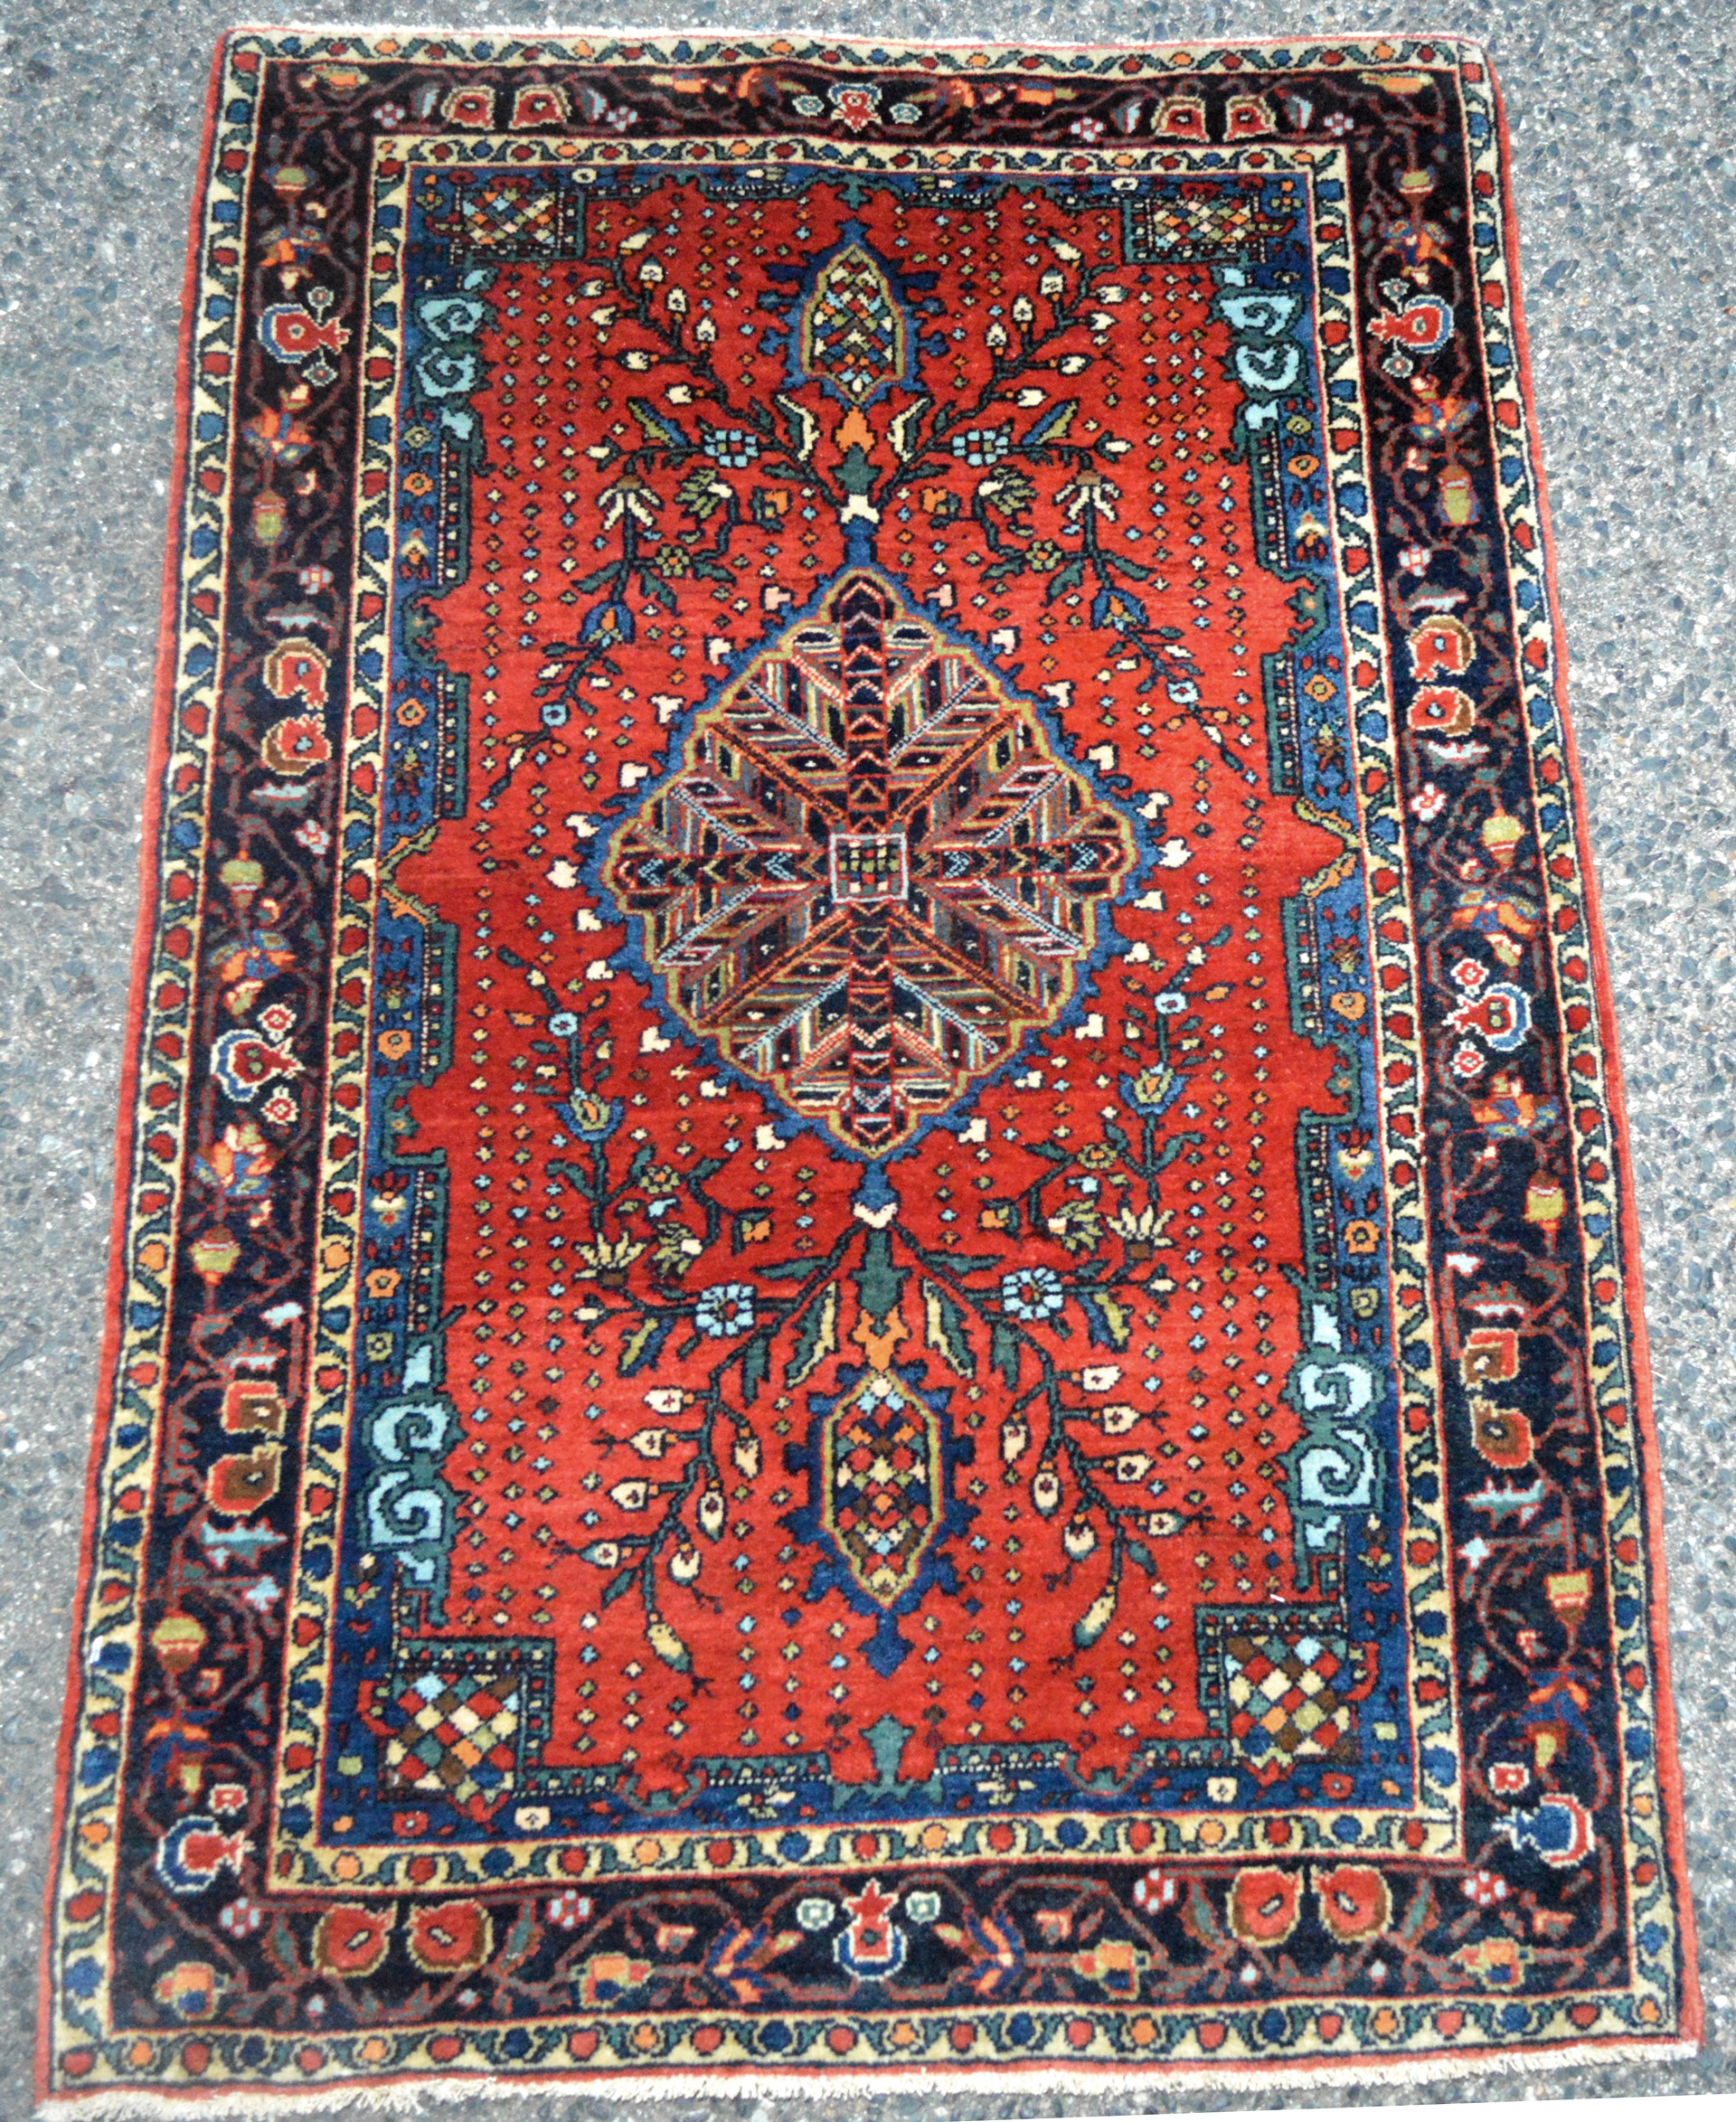 Antique Persian Fereghan Sarouk "mat" or "posit" (a small rug about two feet in width and three feet in length) with a navy blue medallion on a brick red field, circa 1915 - Antique rugs Boston,MA area